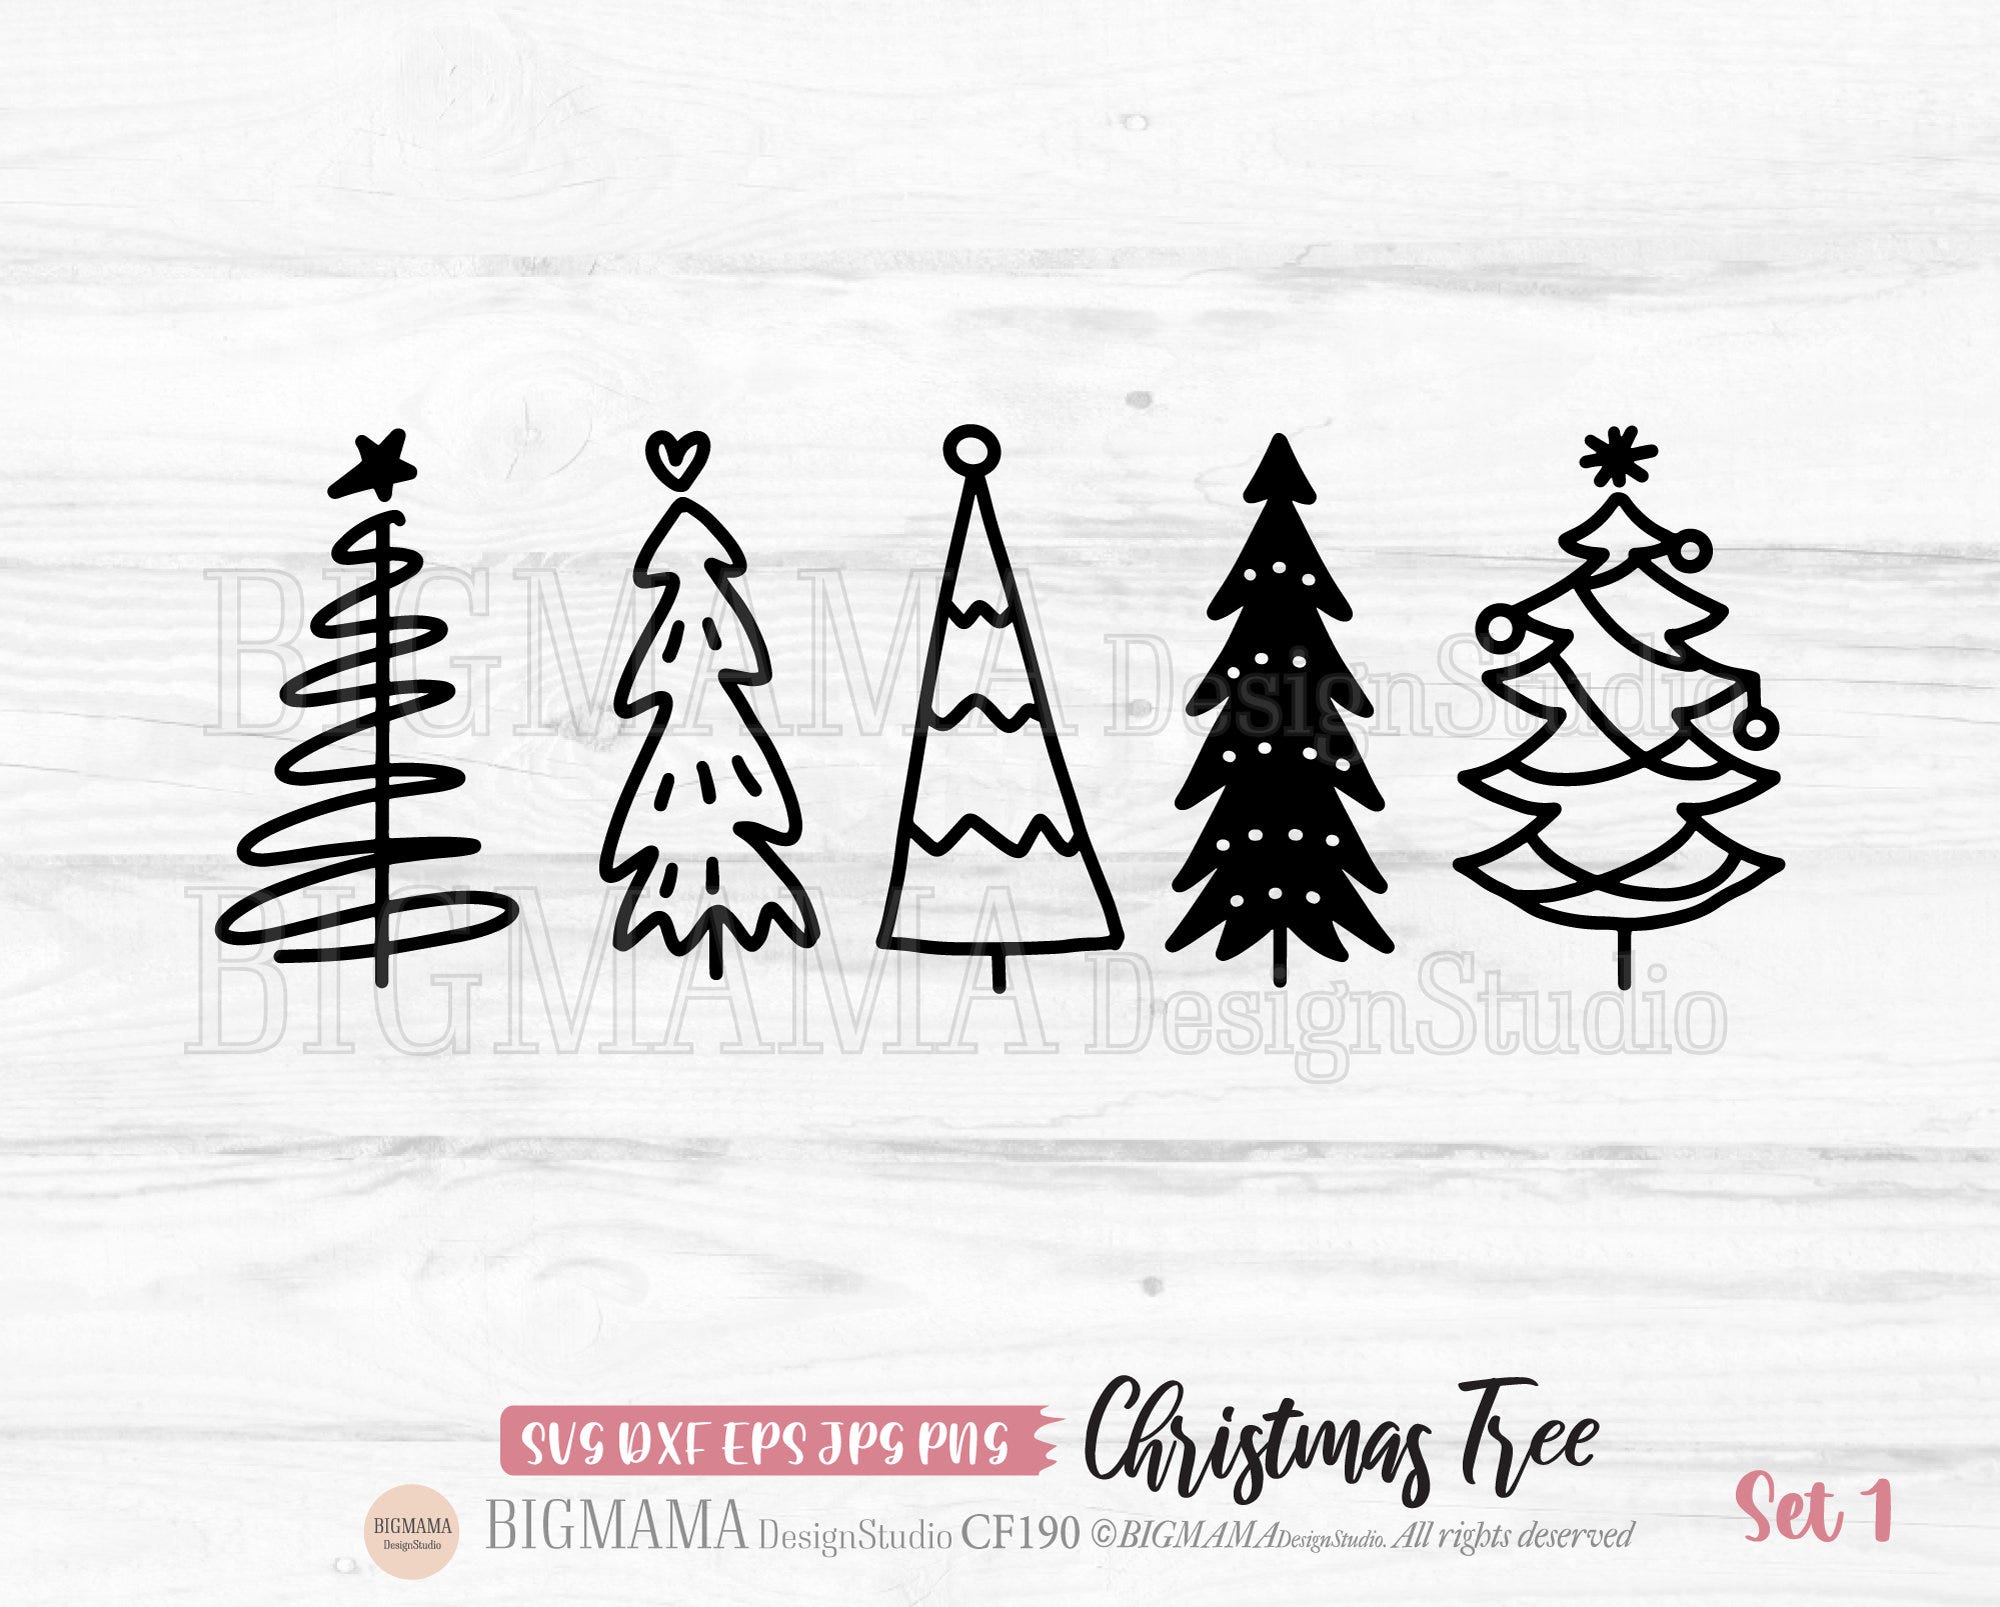 Christmas Tree SVG,Pine Tree,Svg bundle,Hand Drawn,Xmas,DXF,Shirt,Vinyl,PNG,Cut File,Cricut,Silhouette,Commercial use,Instant download_CF190